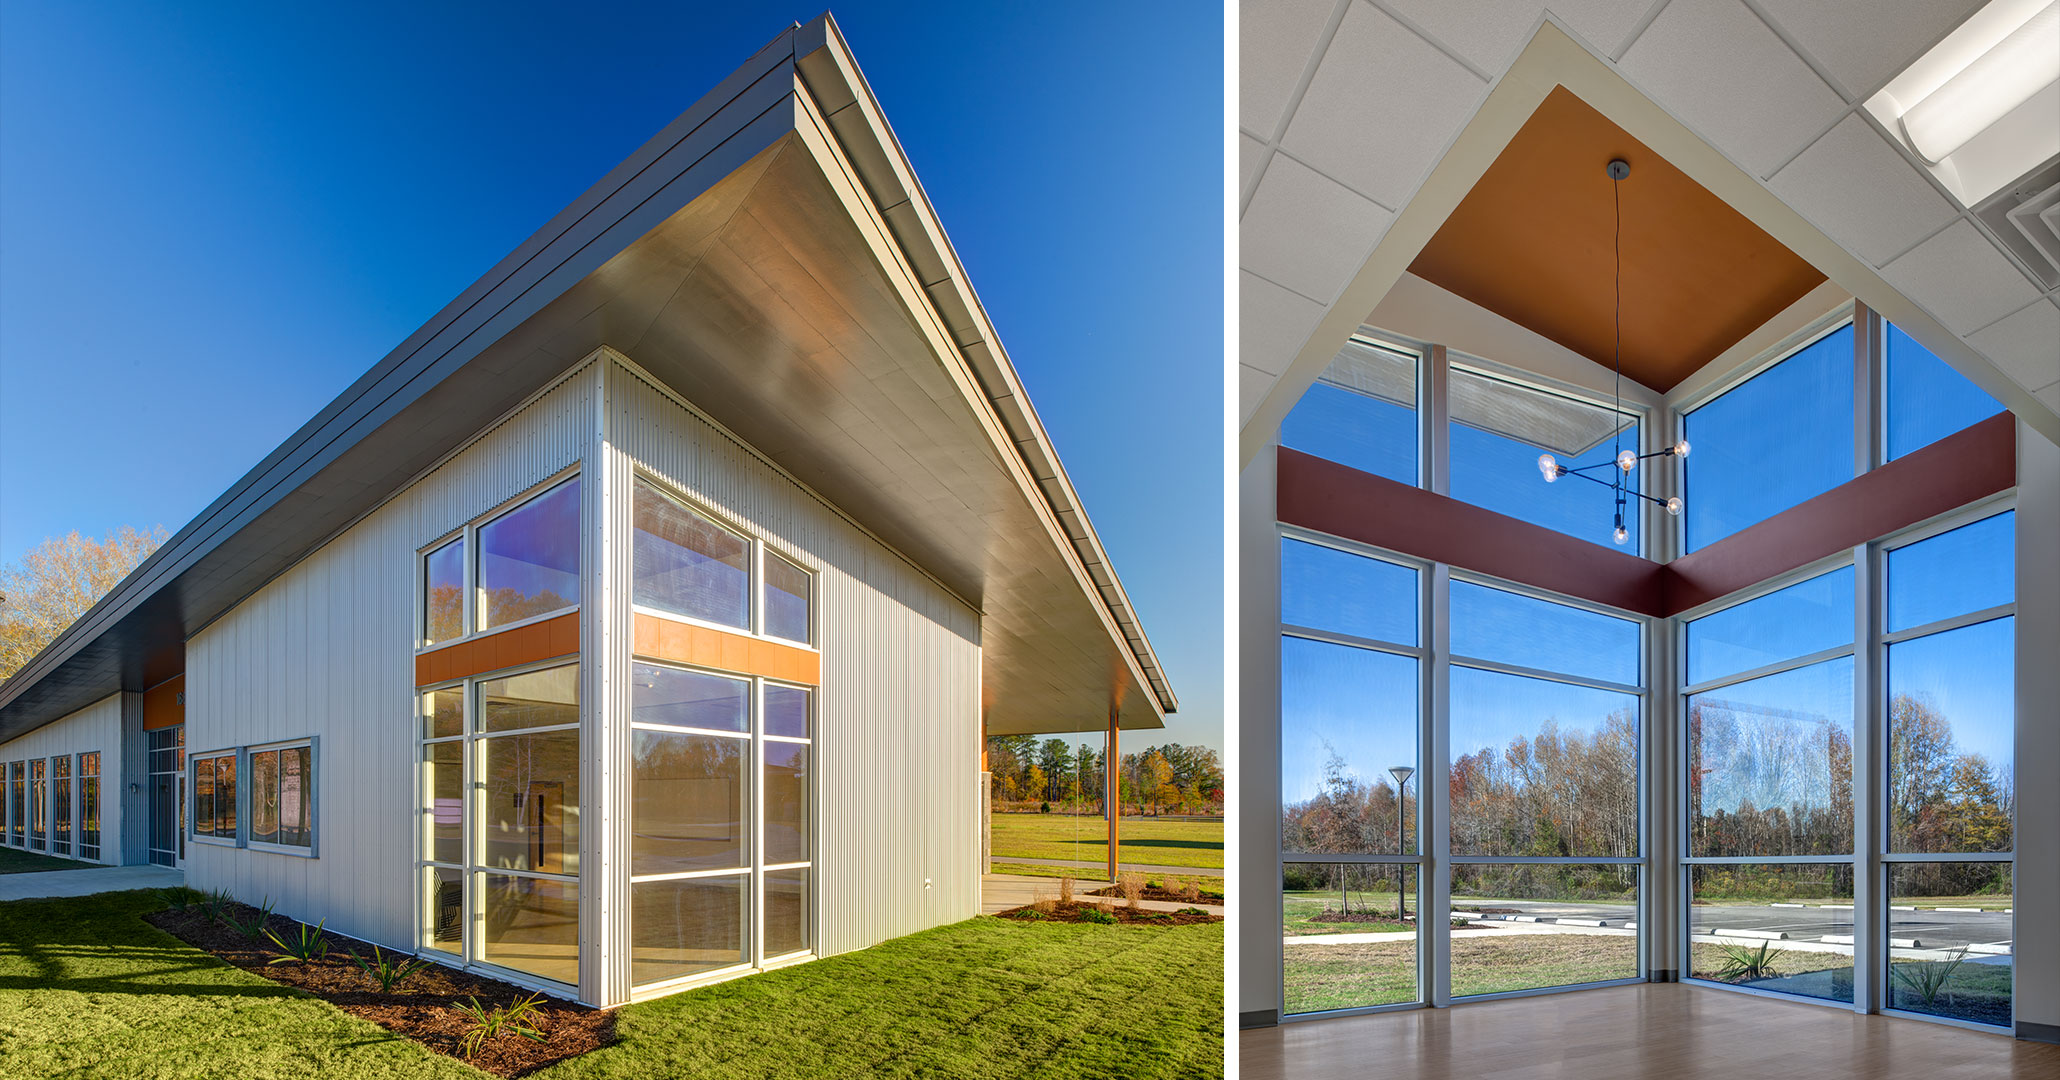 Richland County Recreation Commission hired Boudreaux to design the interiors at the Gadsden Community Center located in Columbia, SC.